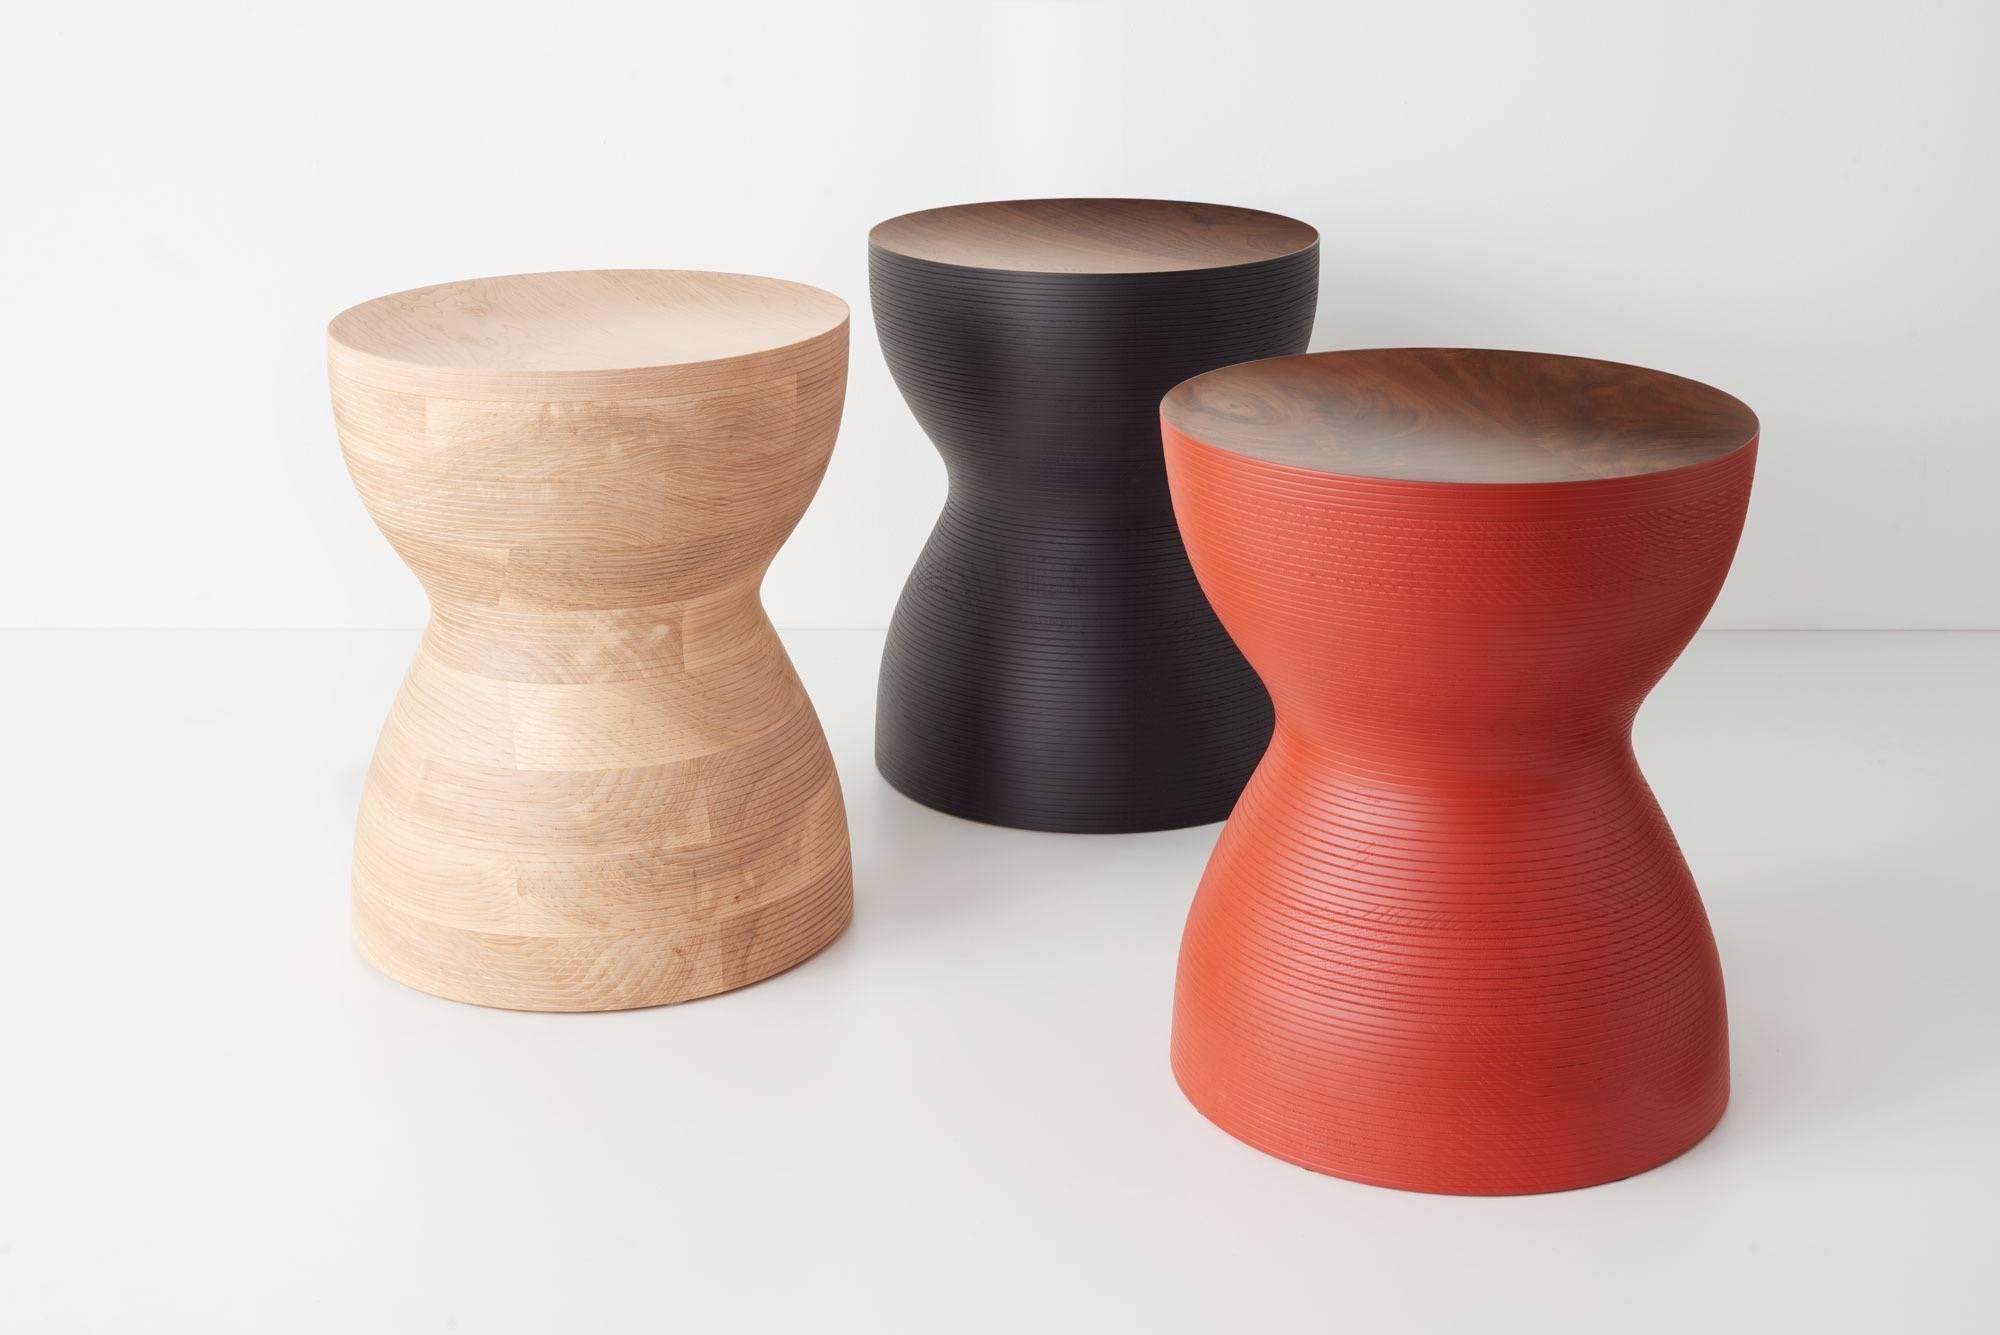 Stacked lamination of ash hardwood with a maple top, turned on a lathe. This pleasing sculptural object can be used as a side table or stool for seating. They look great in this natural finish or in colors - blue, red, or black. They are made of